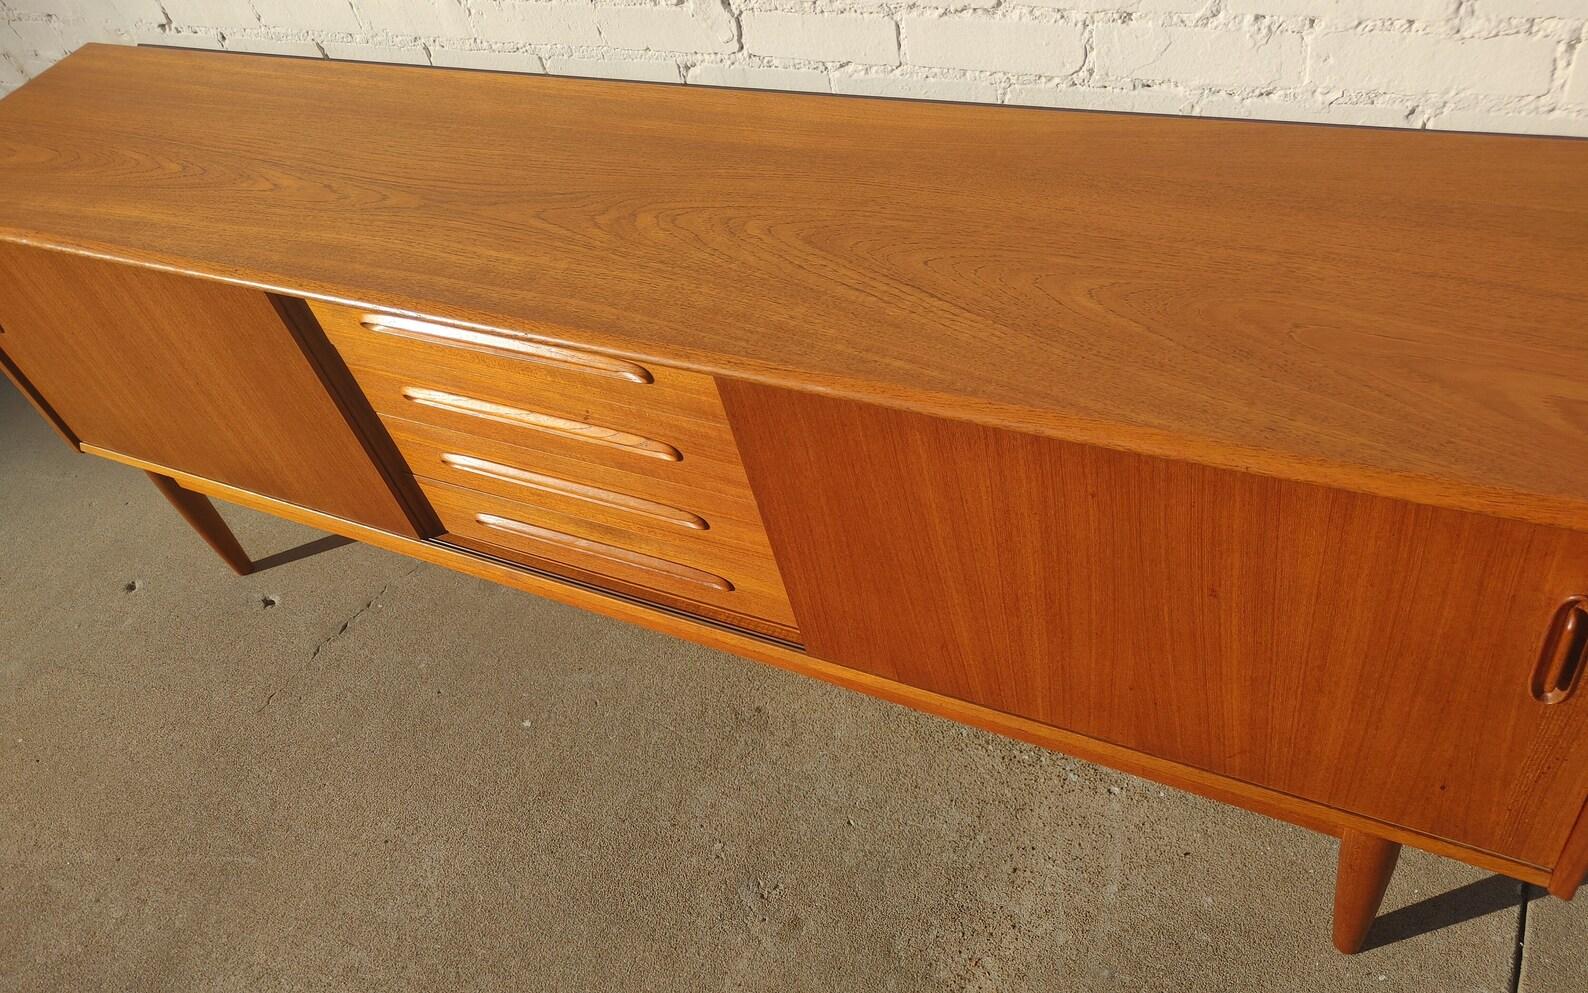 Mid Century Danish Modern Troeds Sideboard

Above average vintage condition and structurally sound. Has some expected slight finish wear and scratching. Has some scratching on front edge. Outdoor listing pictures might appear slightly darker or more